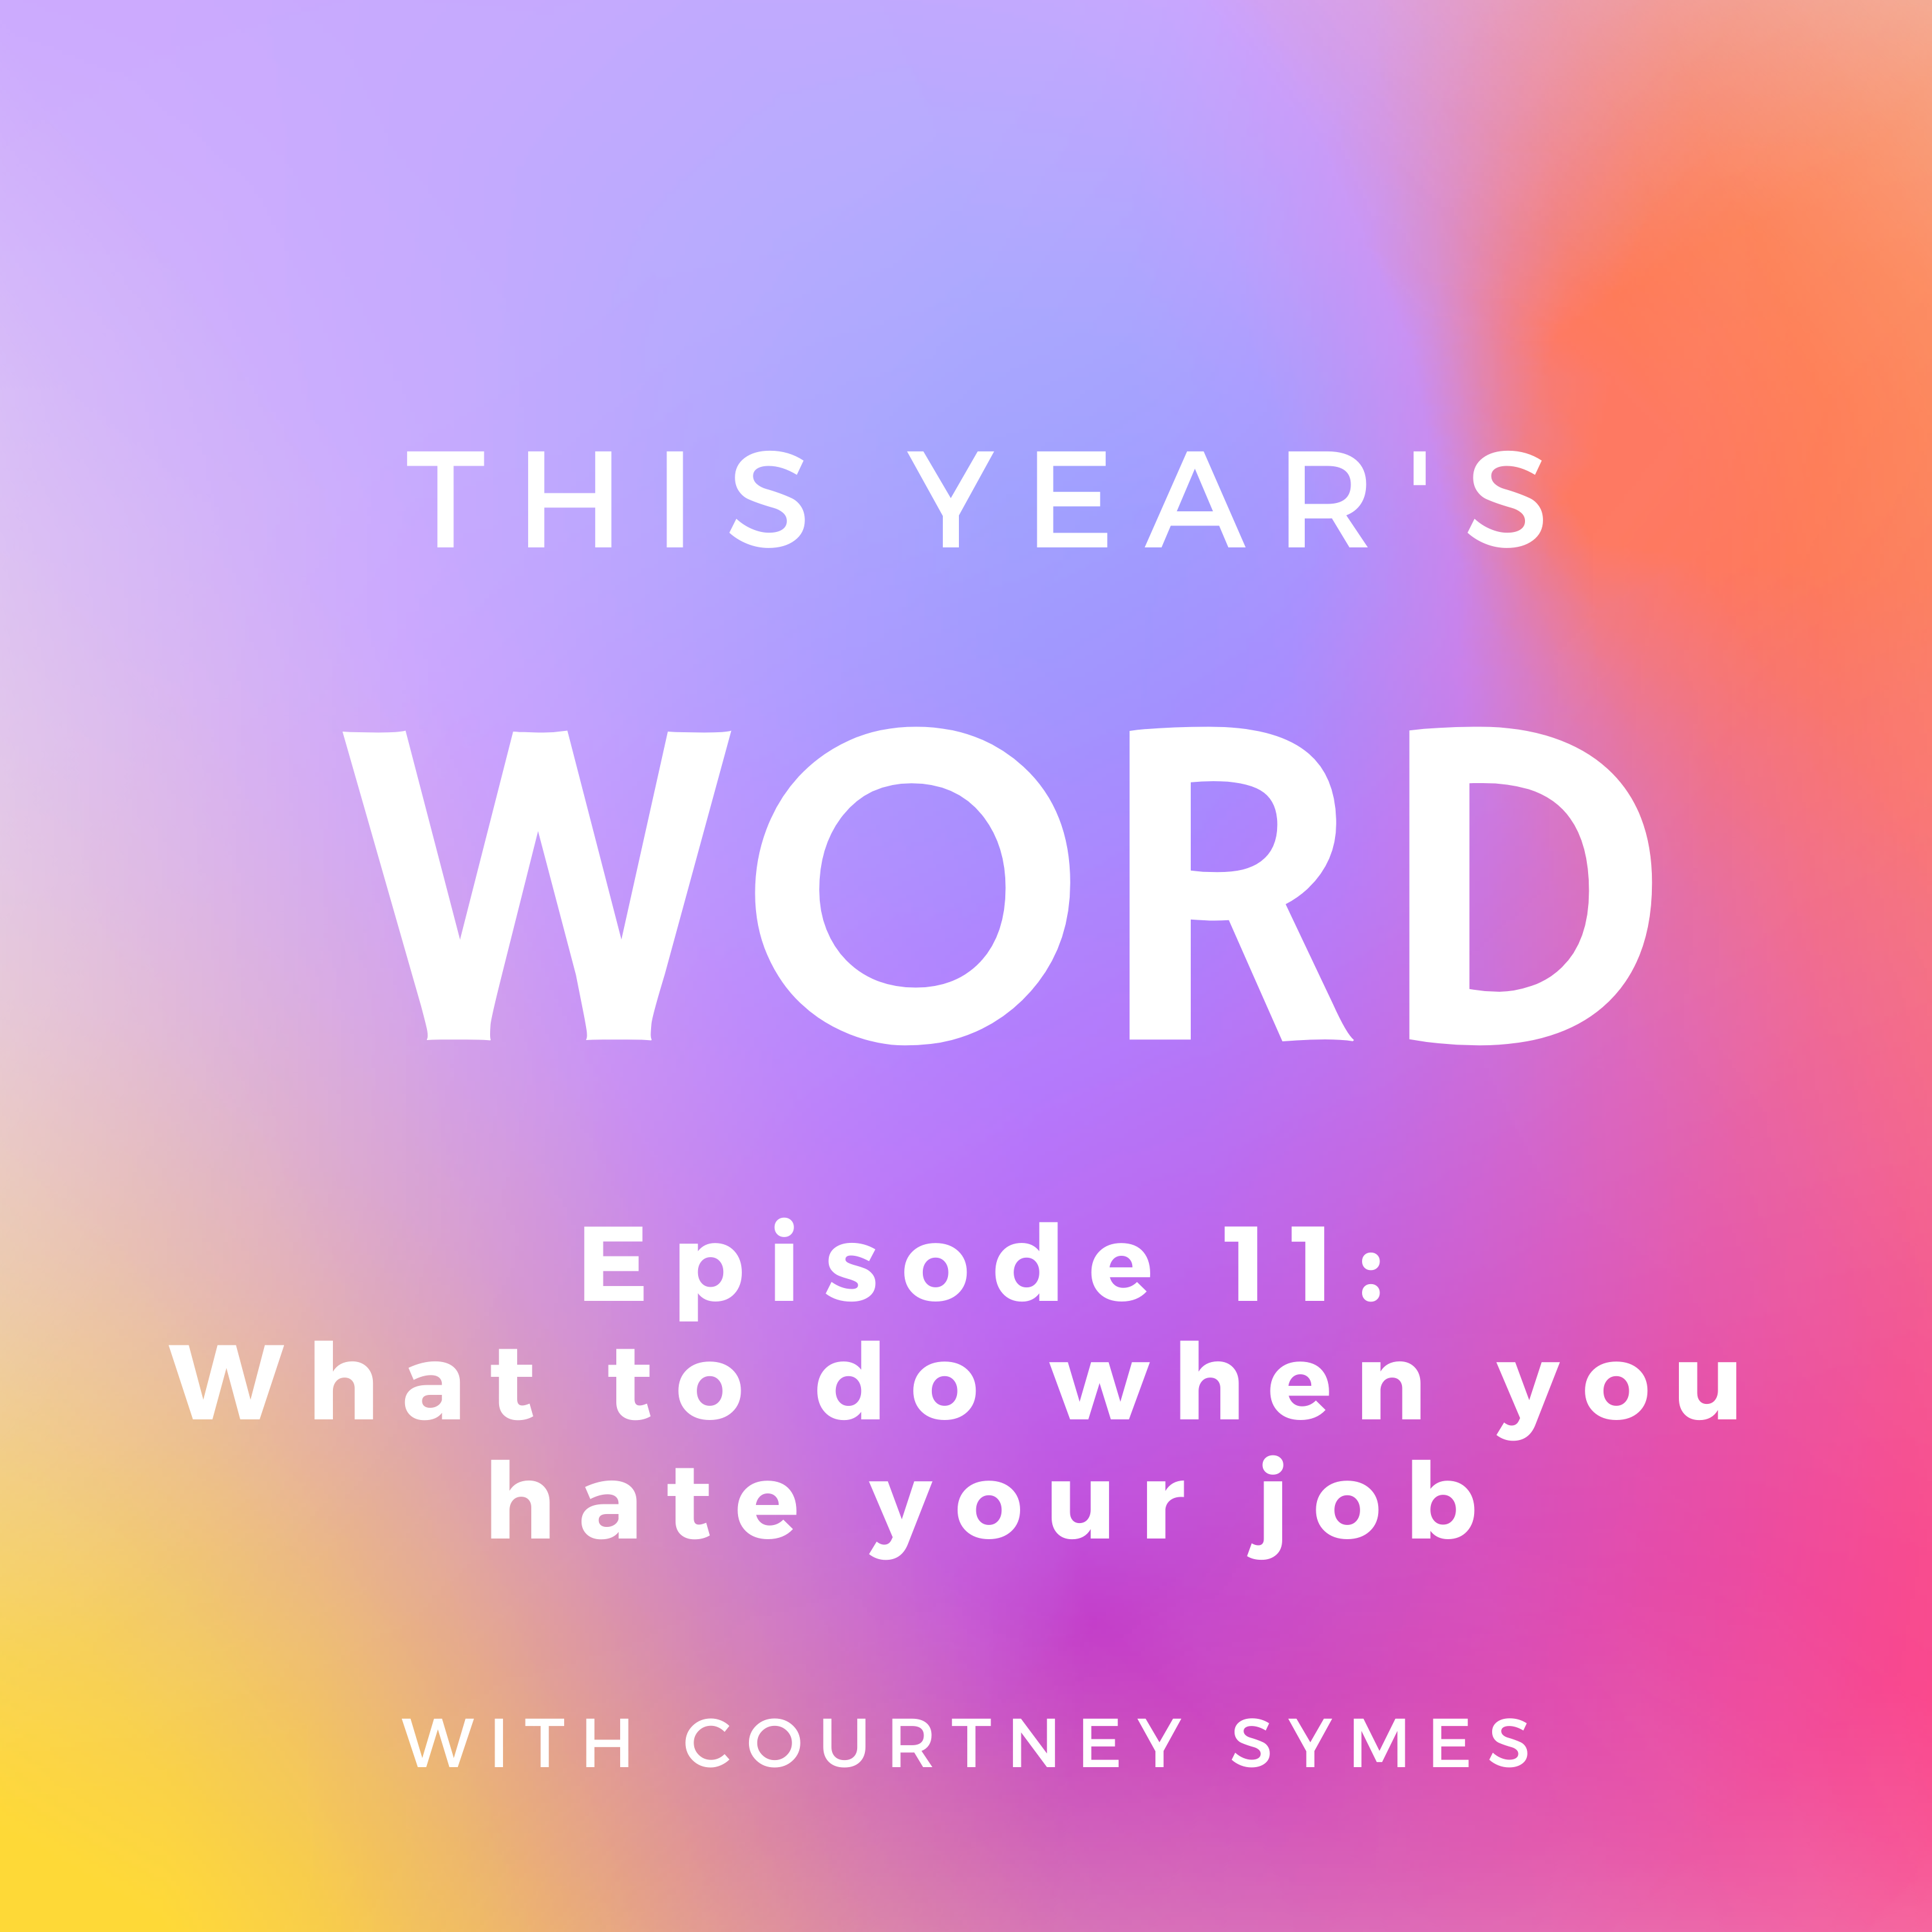 This Year’s Word Podcast Shownotes: Episode 11, What to do when you hate your job